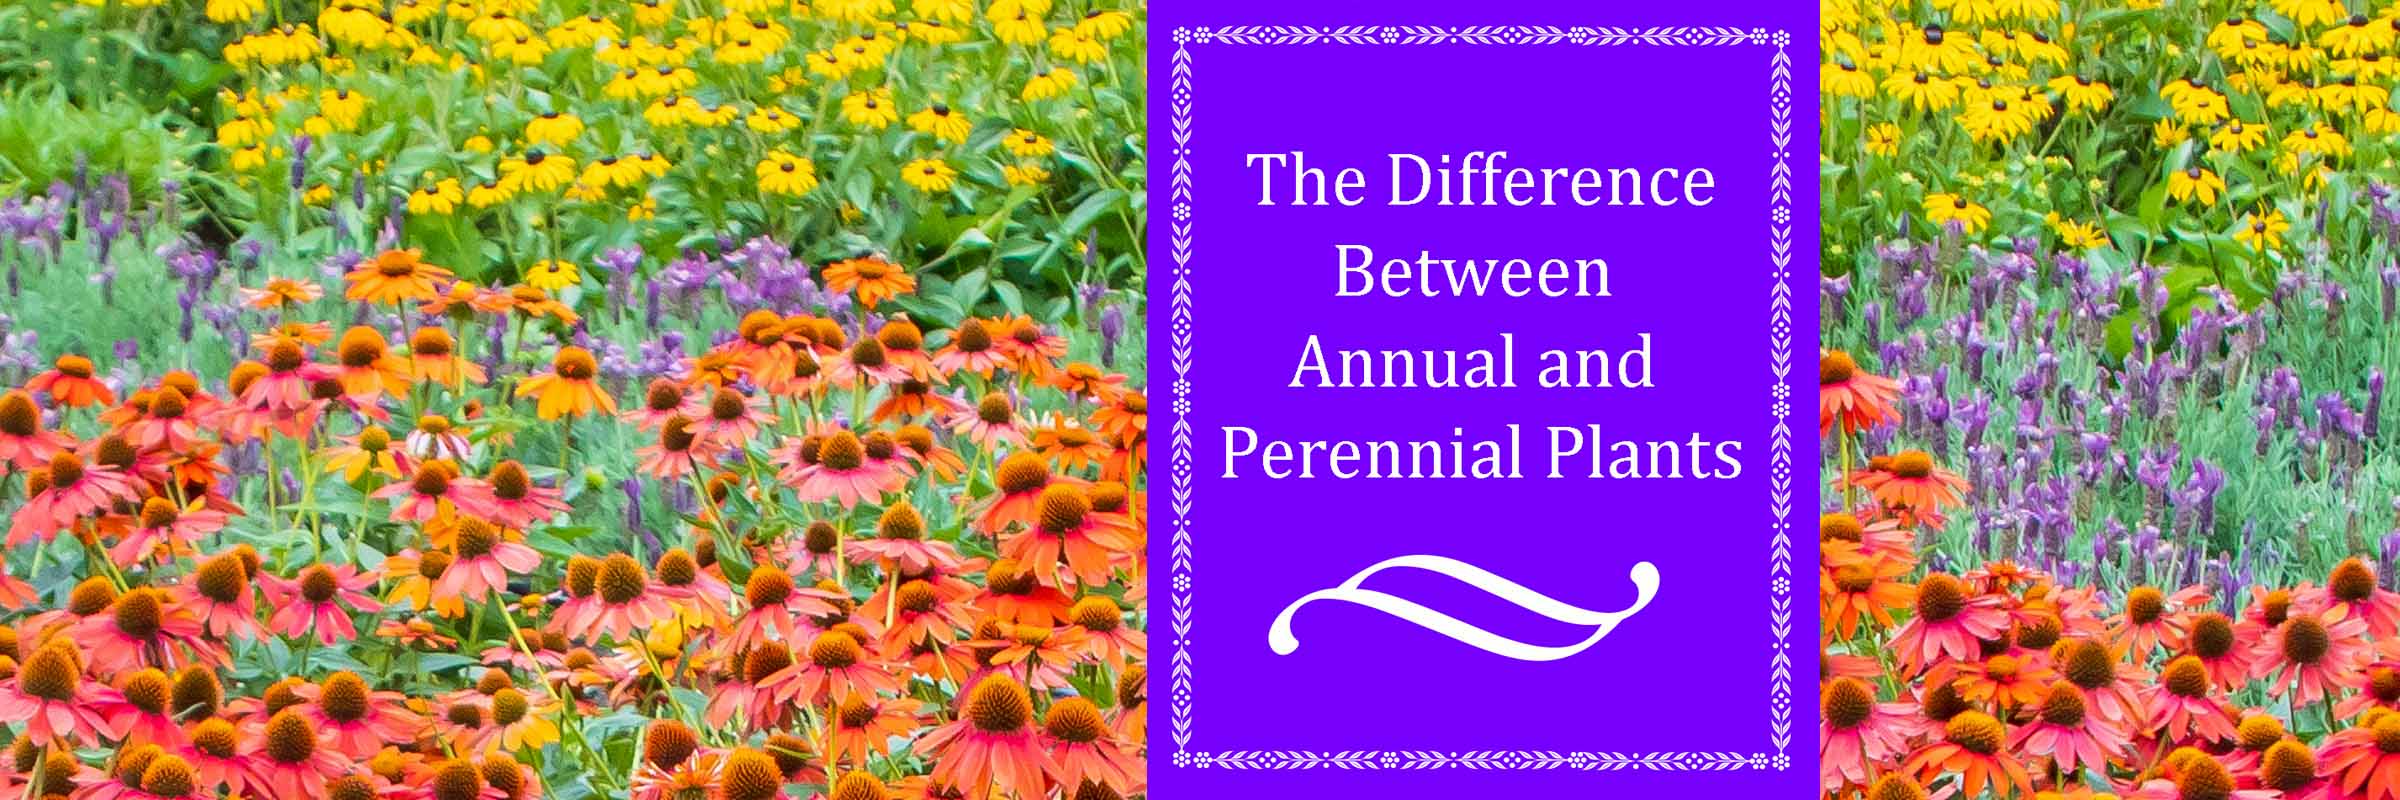 Difference between annual and perennial plants